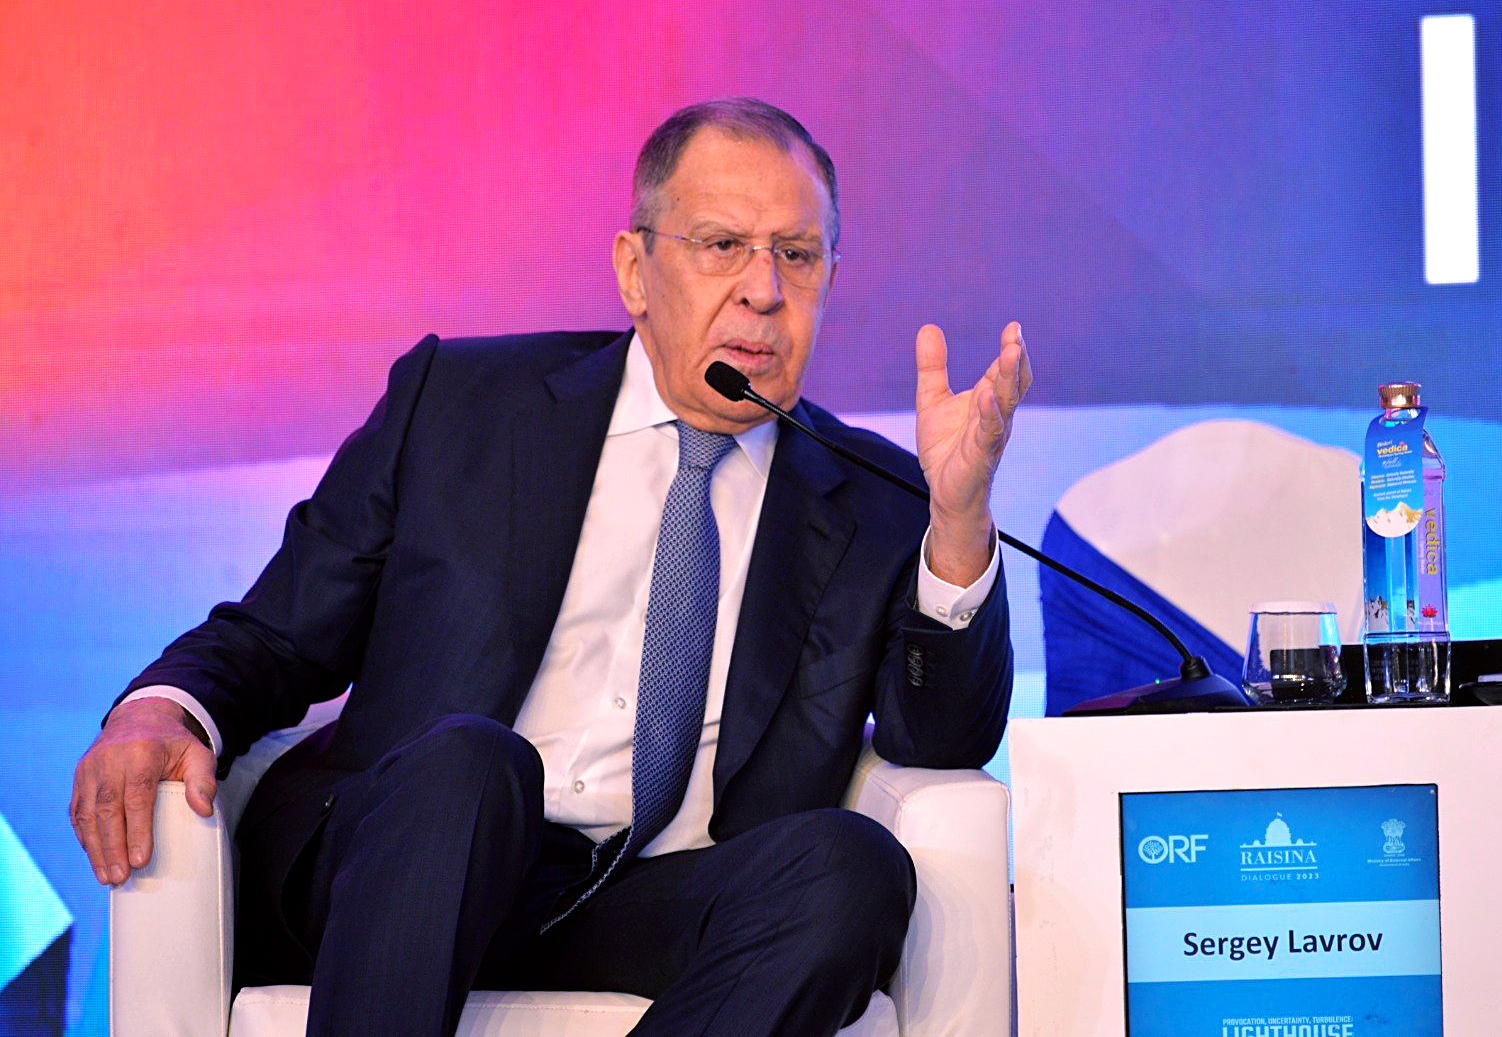 Russian Foreign Minister arrives at BRICS Summit in South Africa